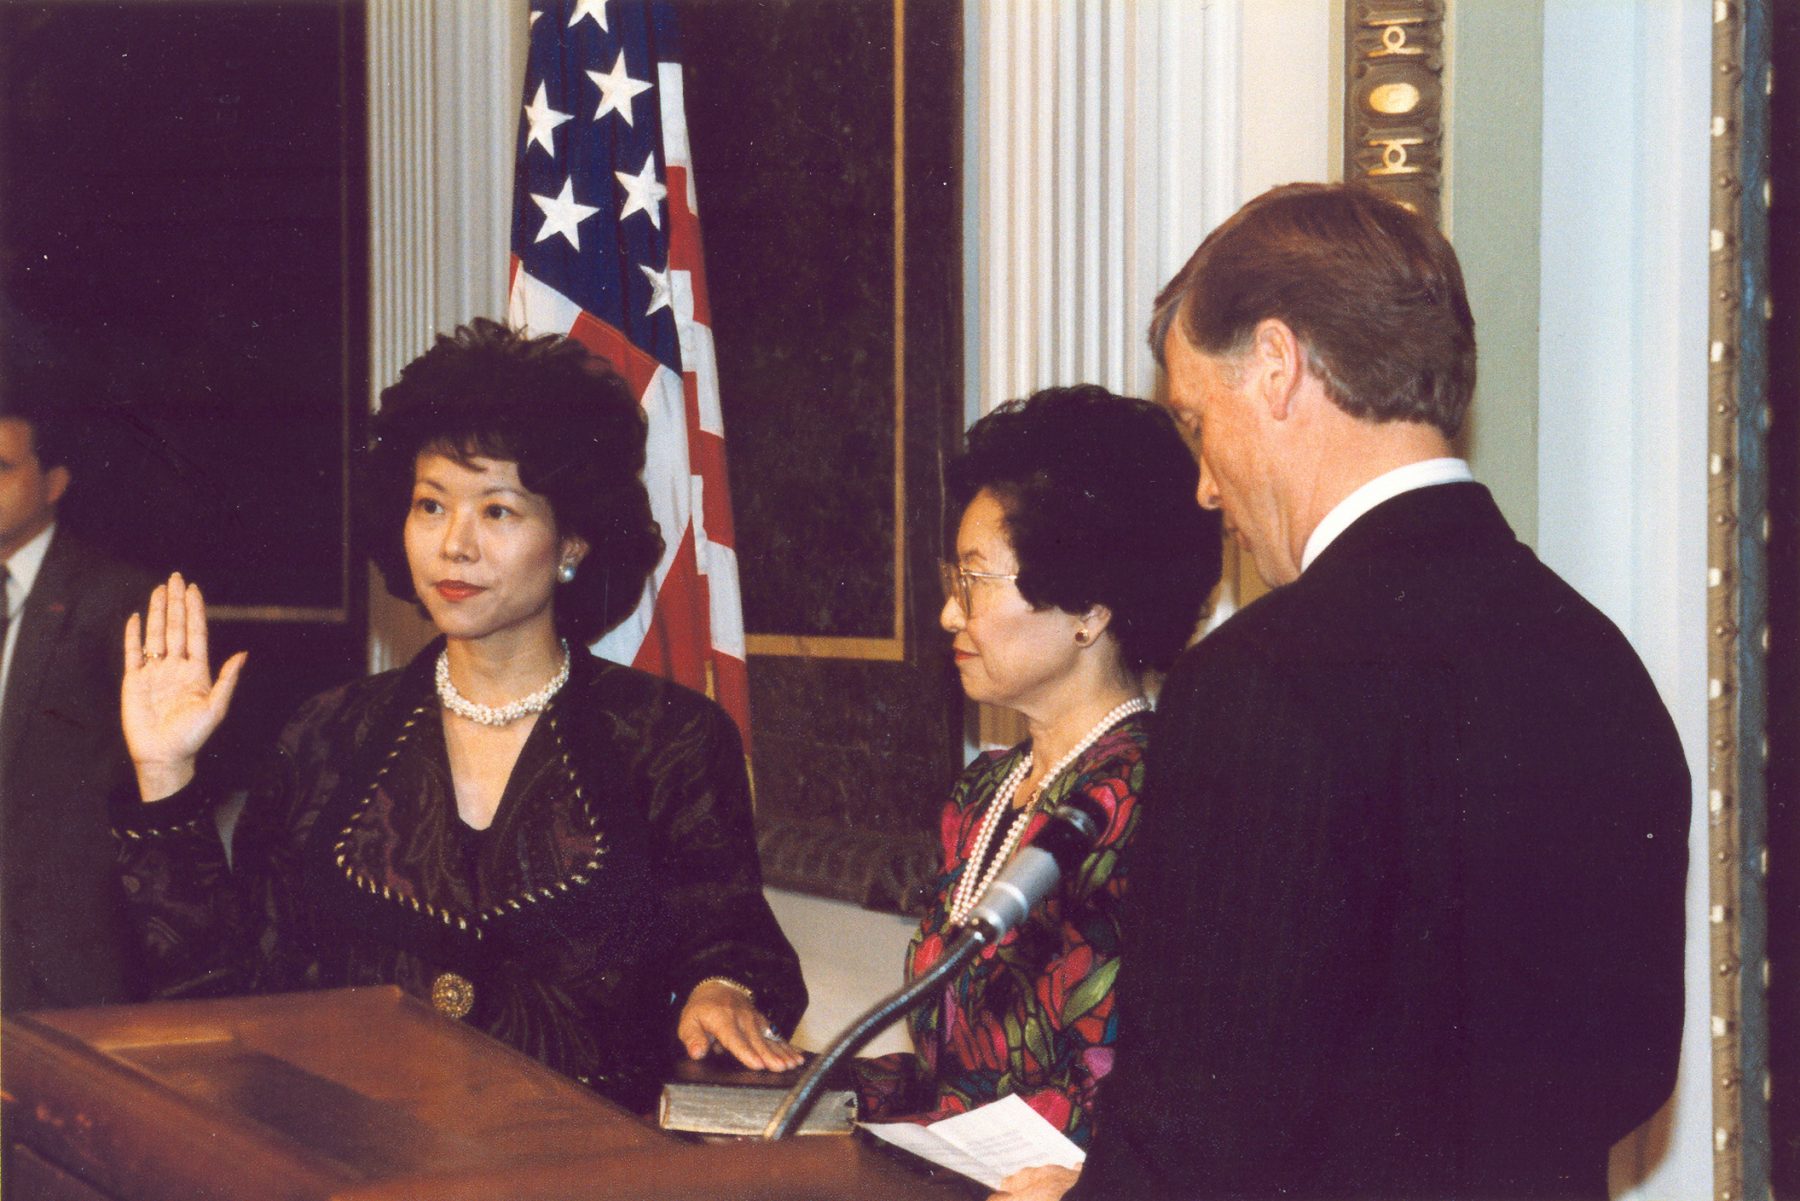 Elaine Chao being sworn in by Vice President Dan Quayle as the first Asian Pacific American Director of the Peace Corps.